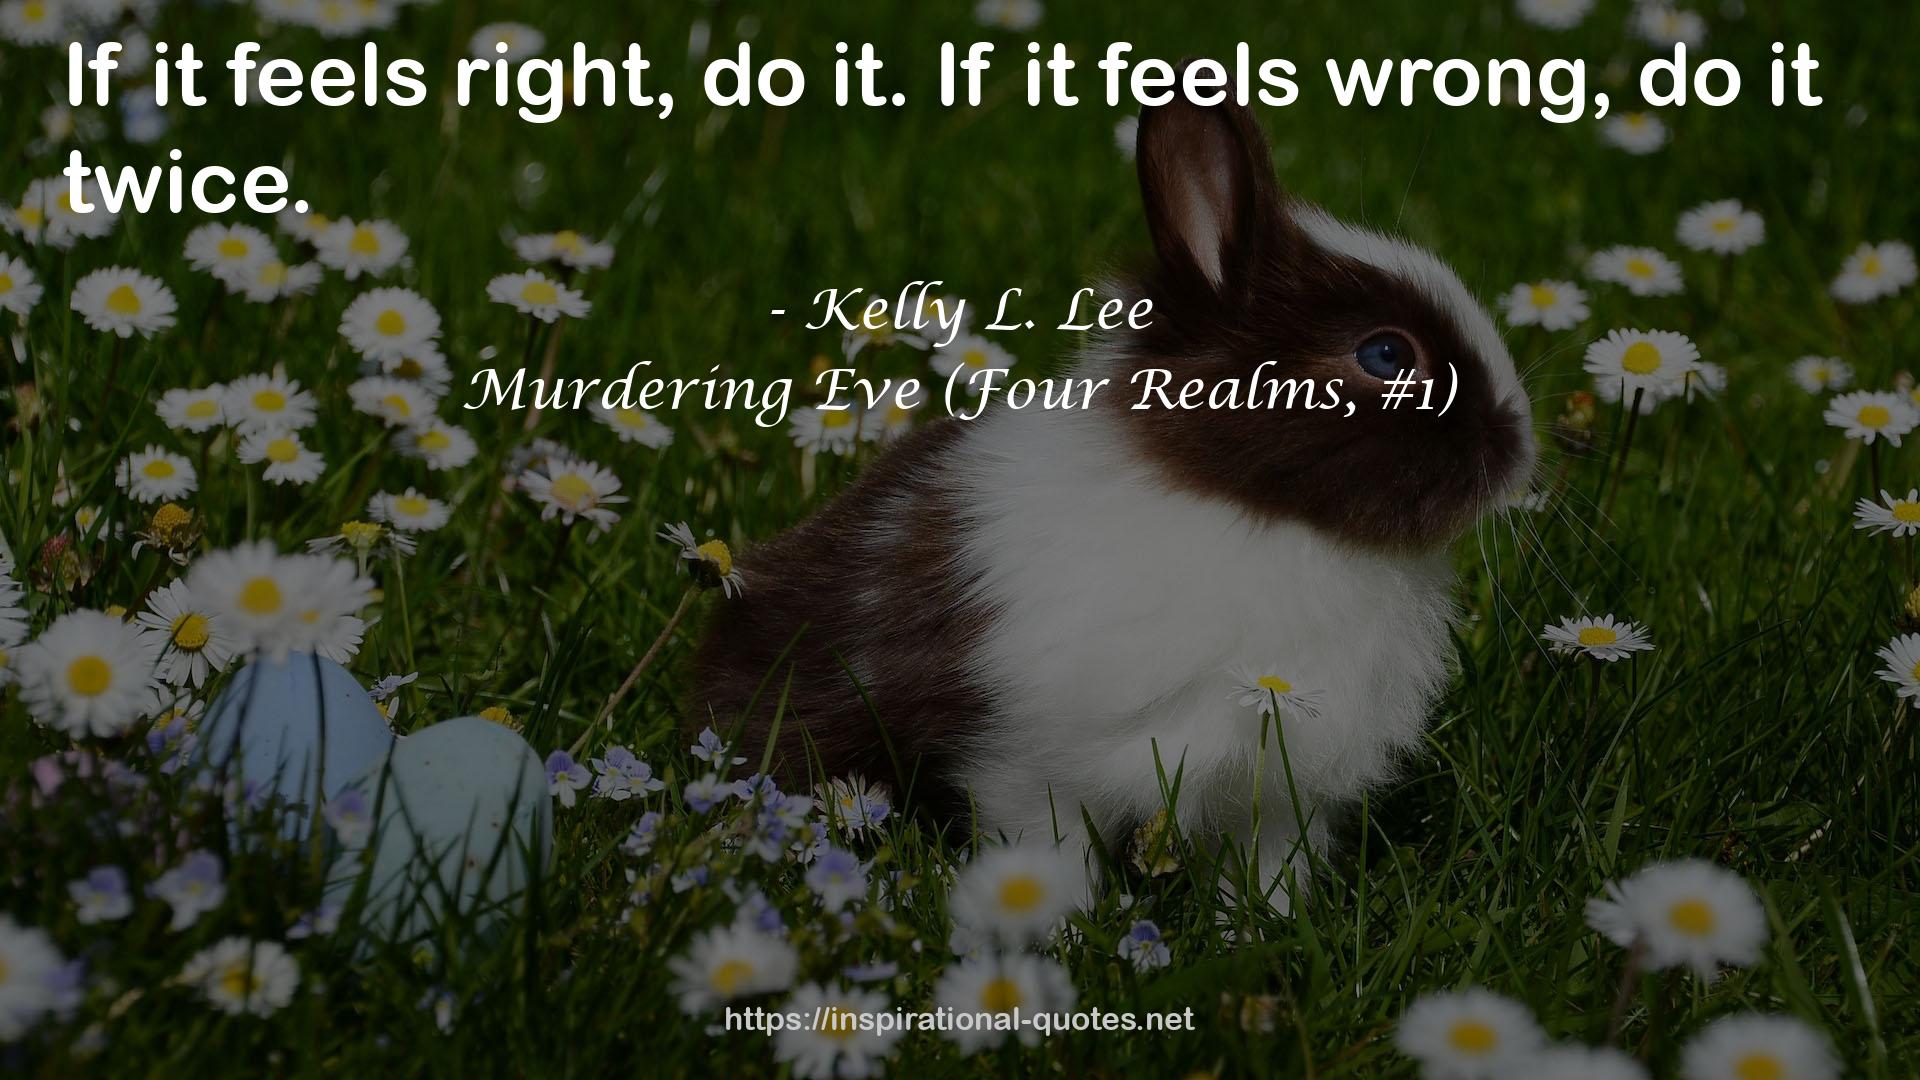 Kelly L. Lee QUOTES